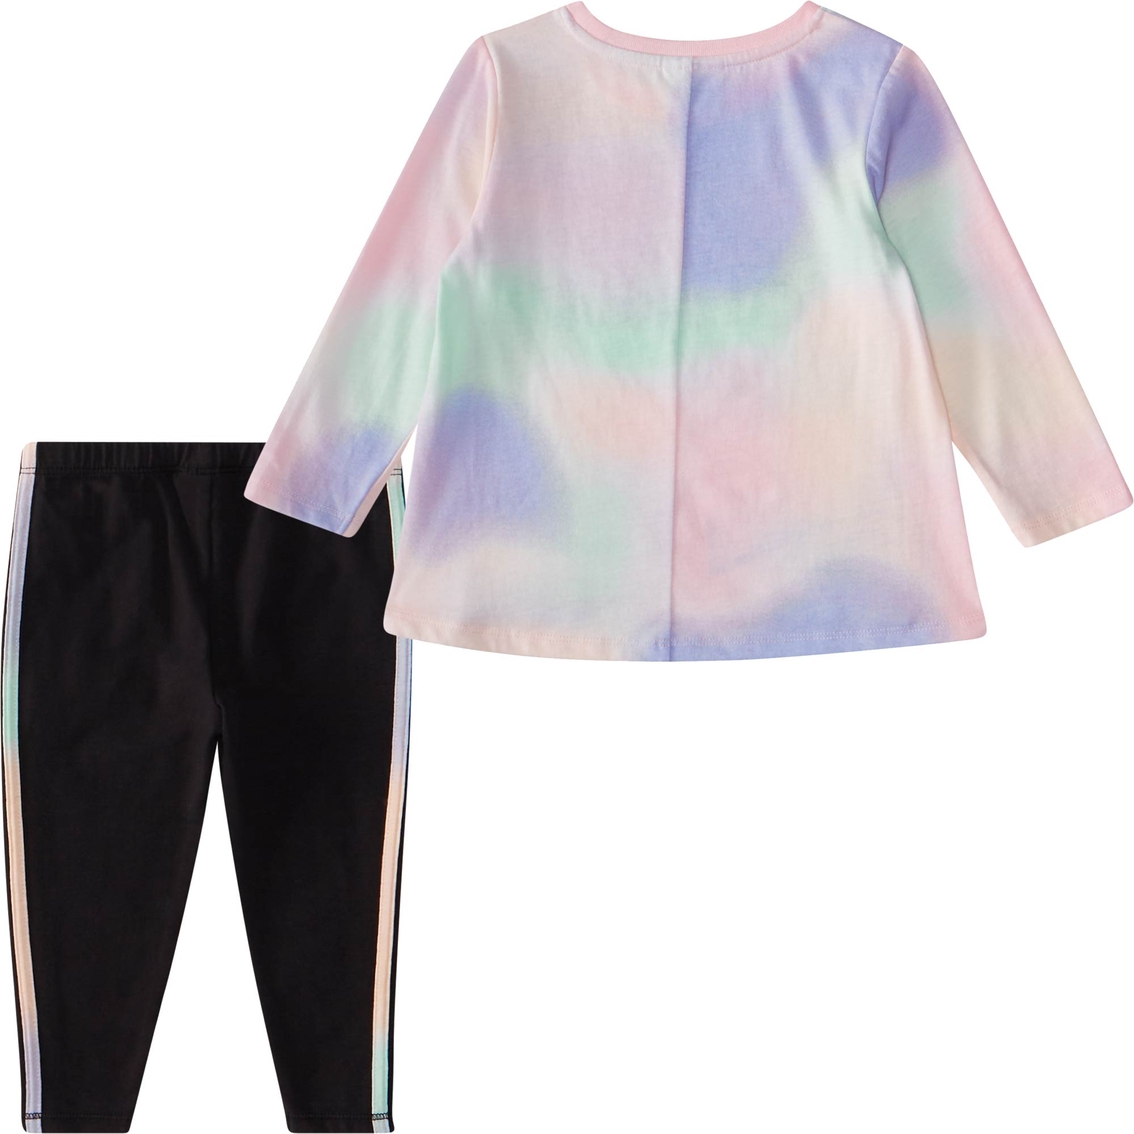 Adidas Infant Girls Gradient Swing Tee and Tights 2 pc. Set - Image 2 of 2